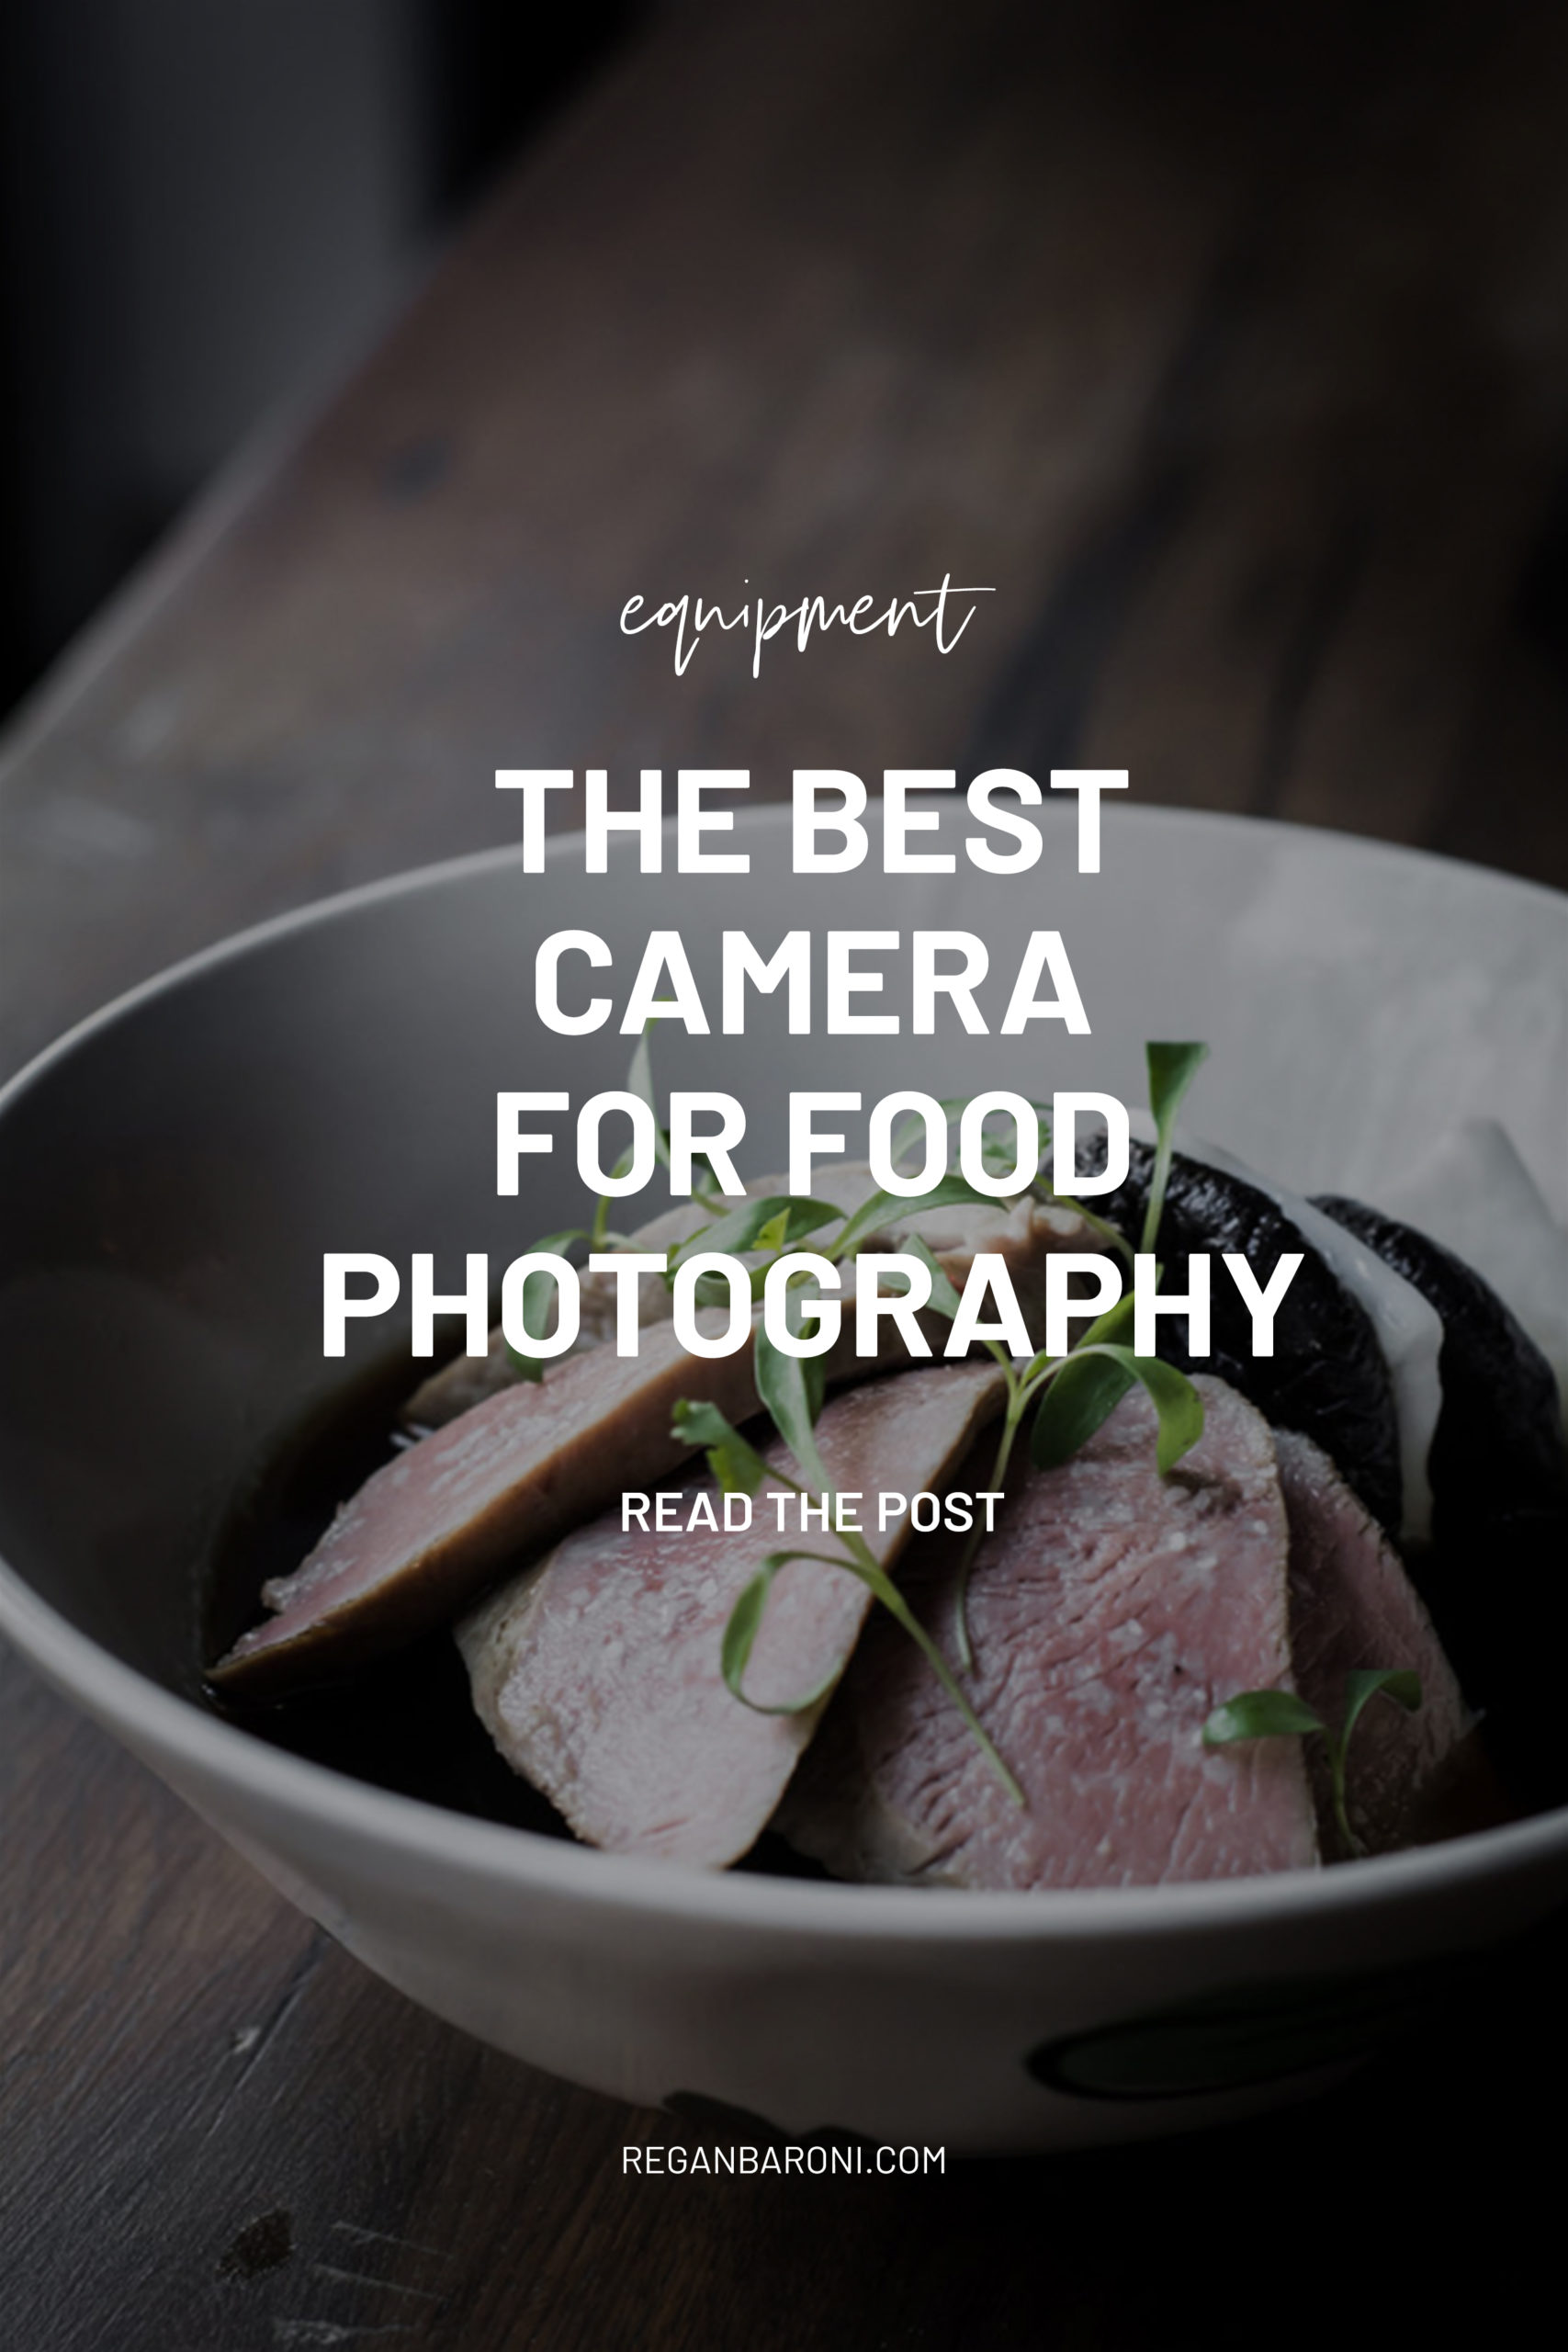 The Best Camera for Food Photography